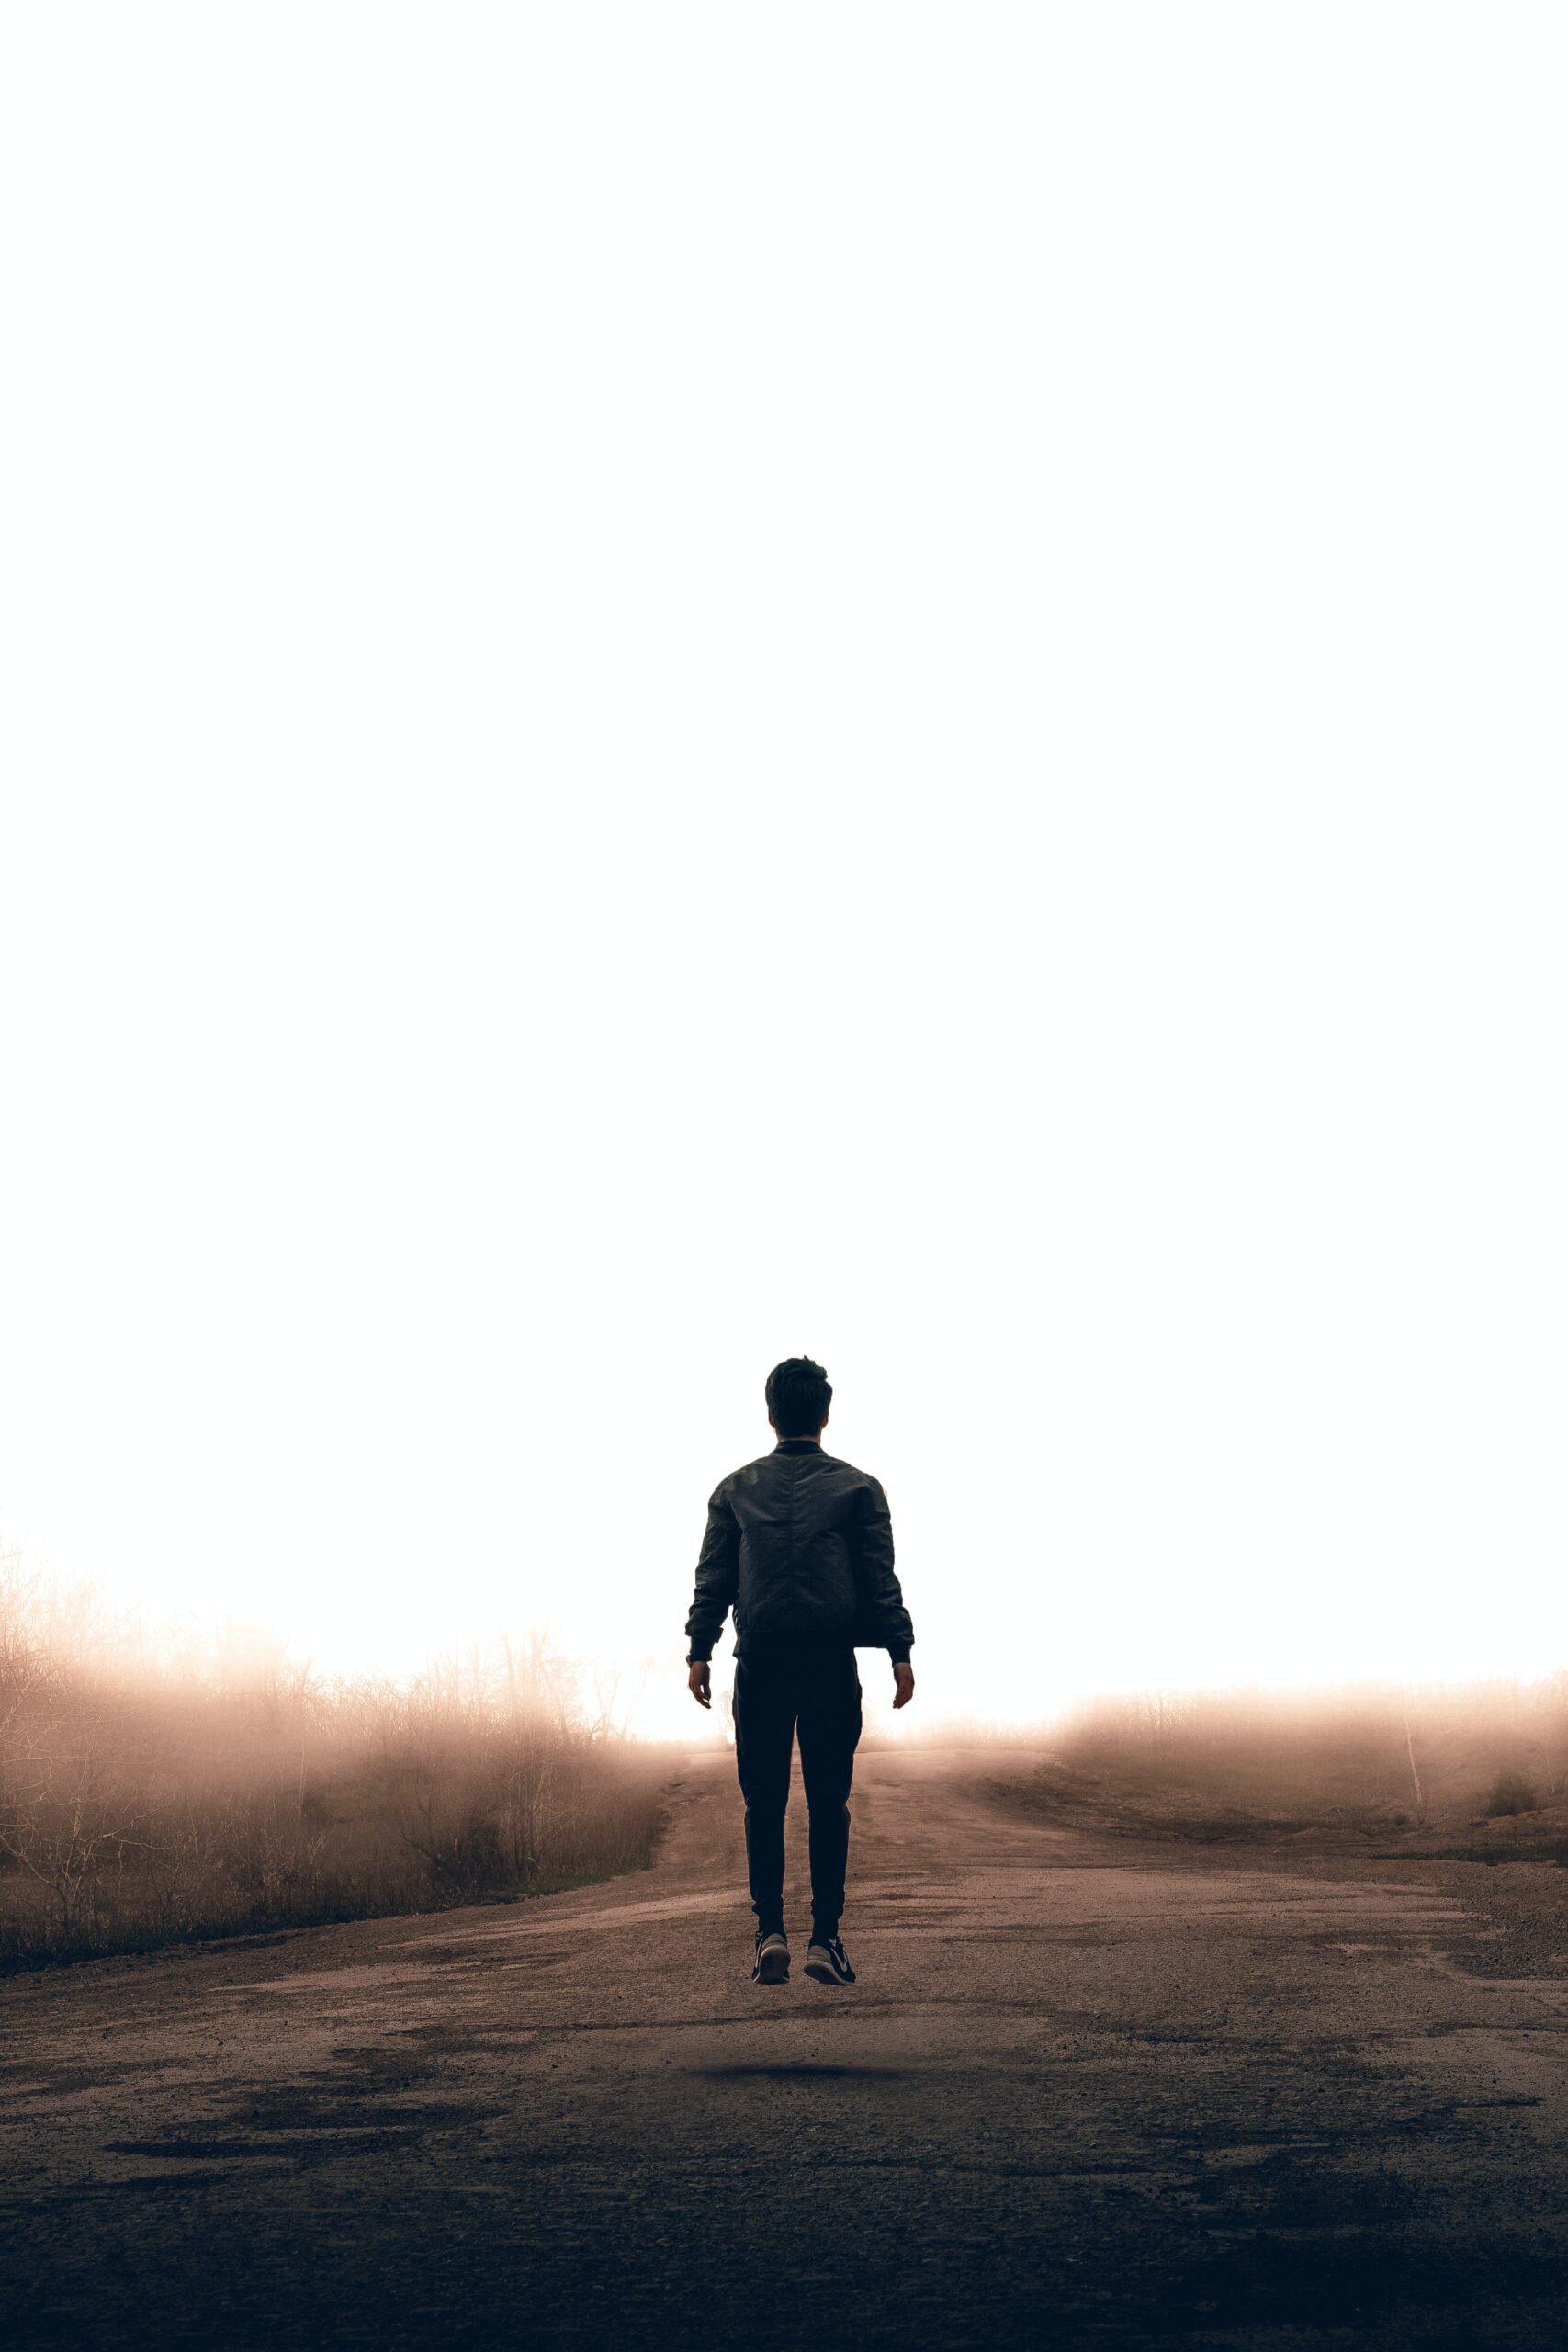 The silhouette of a man walking away along a country road